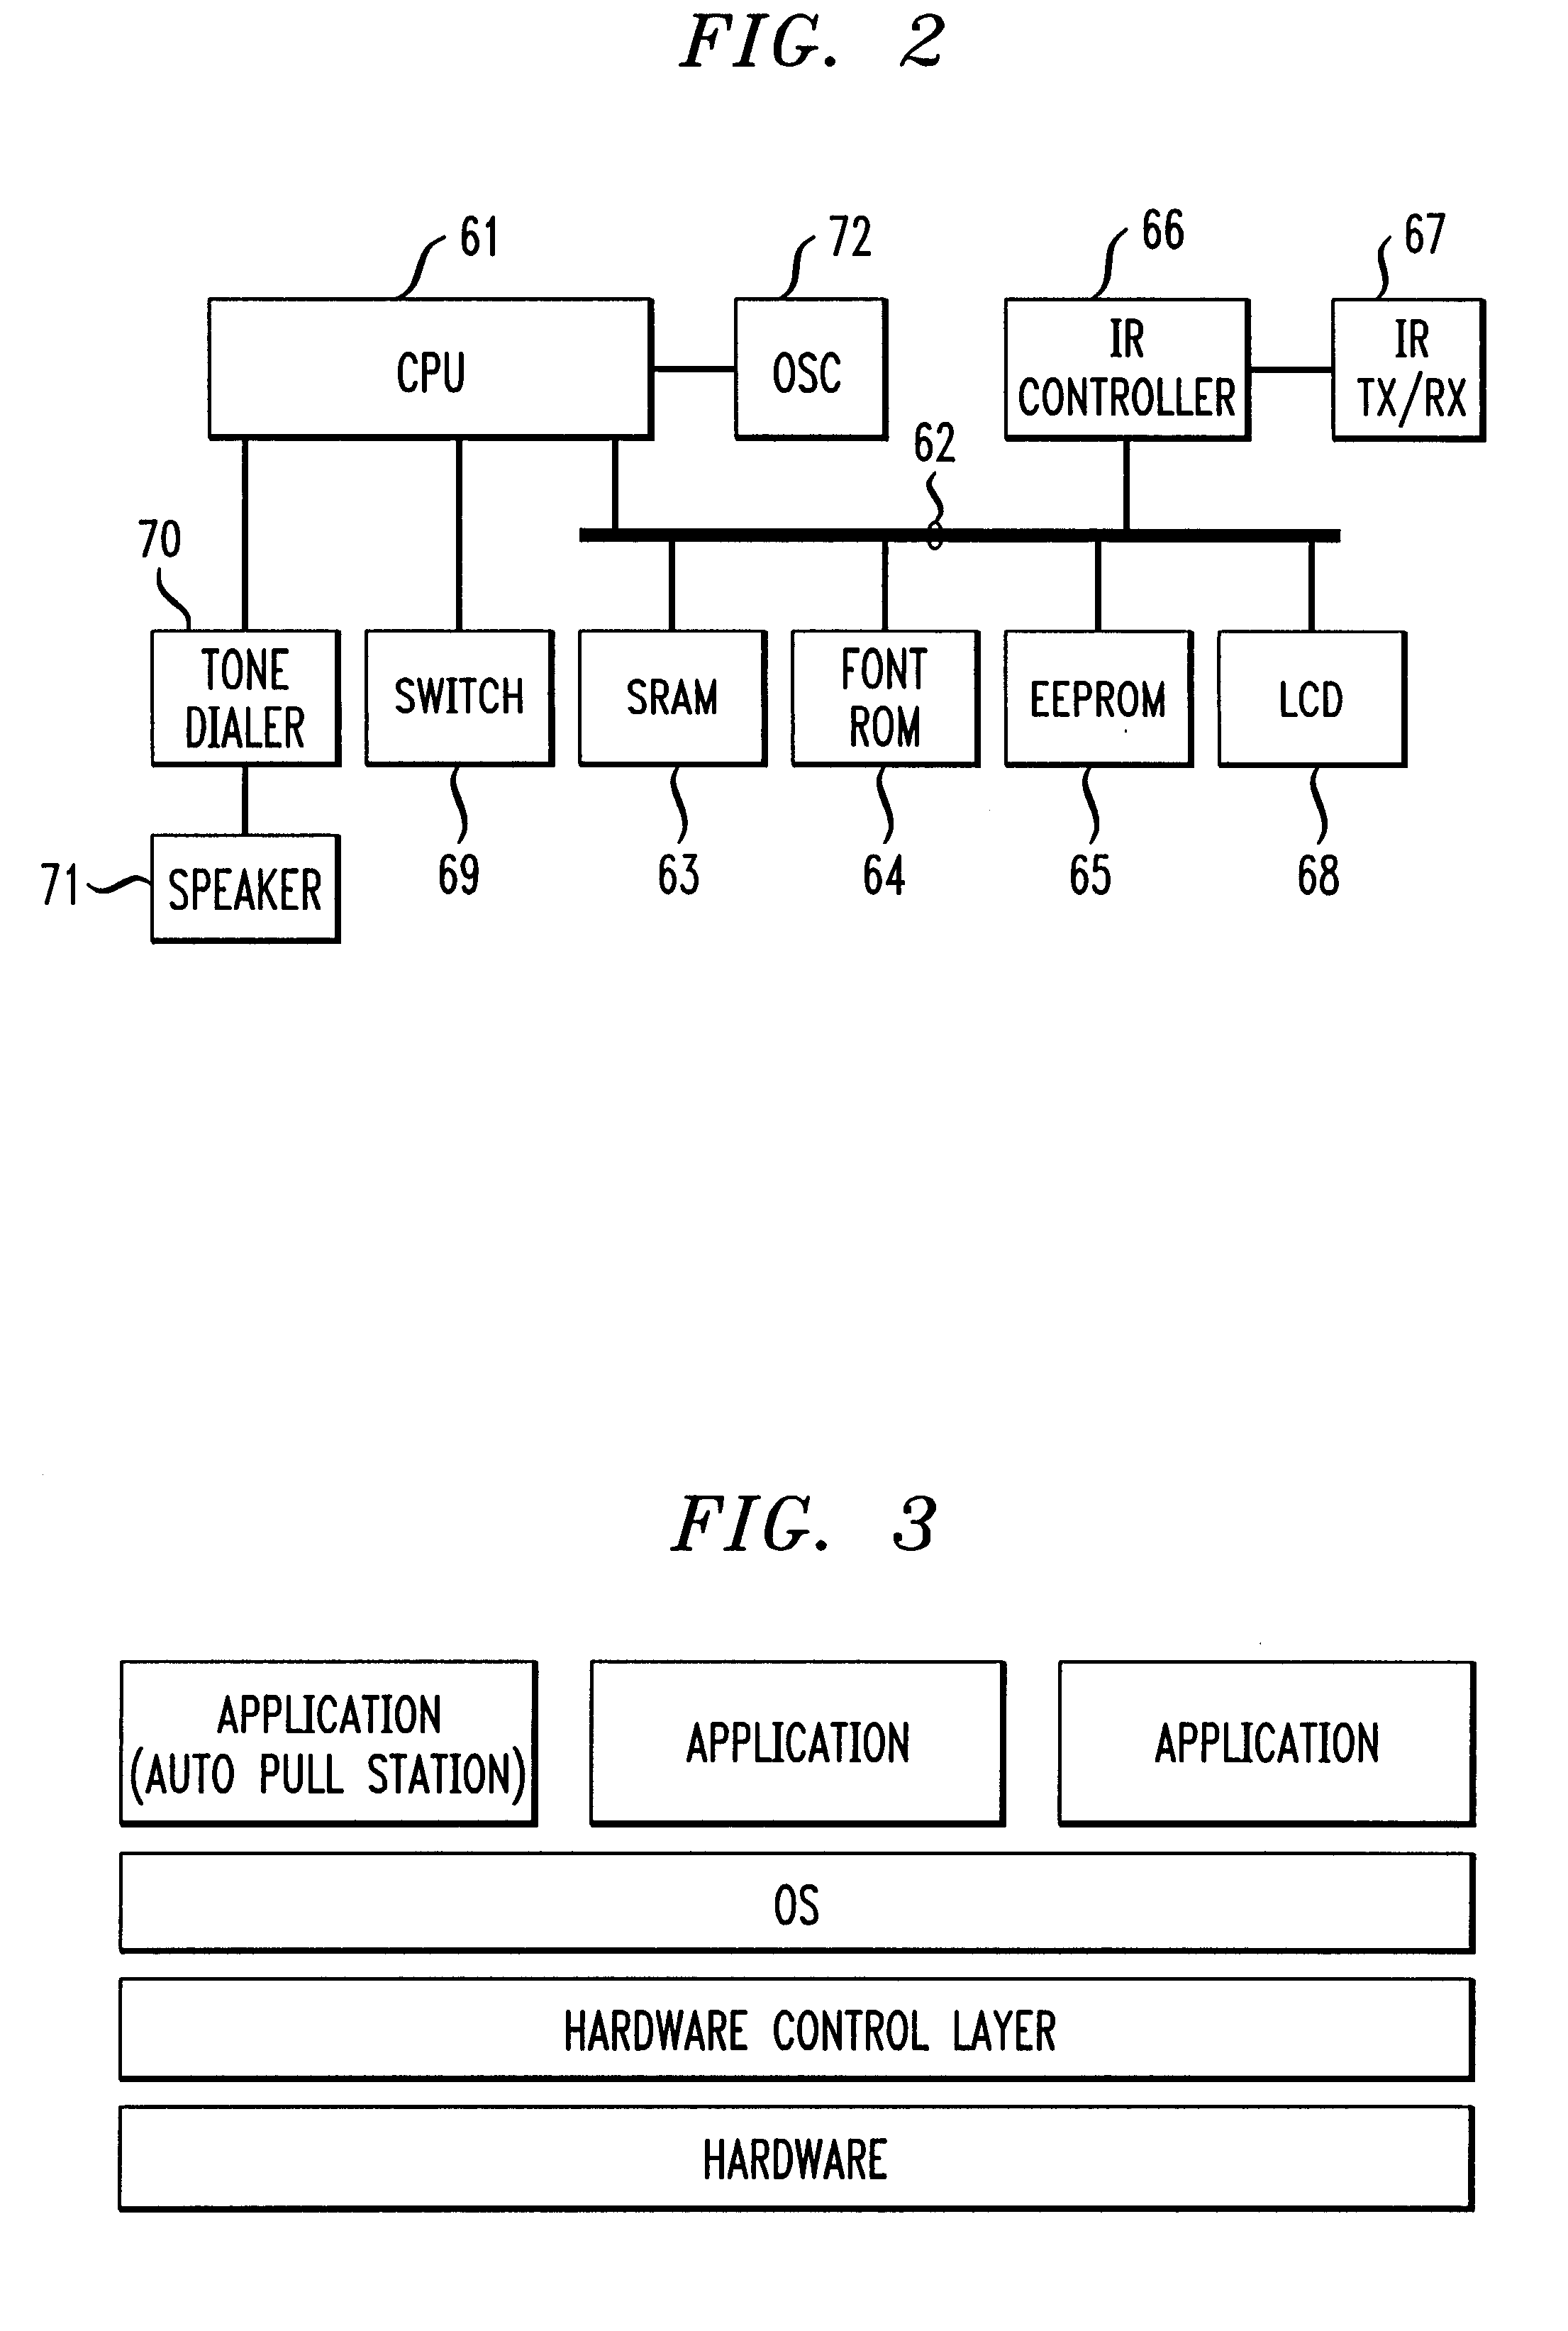 Methods and apparatus for downloading data between an information processing device and an external device via a wireless communications technique